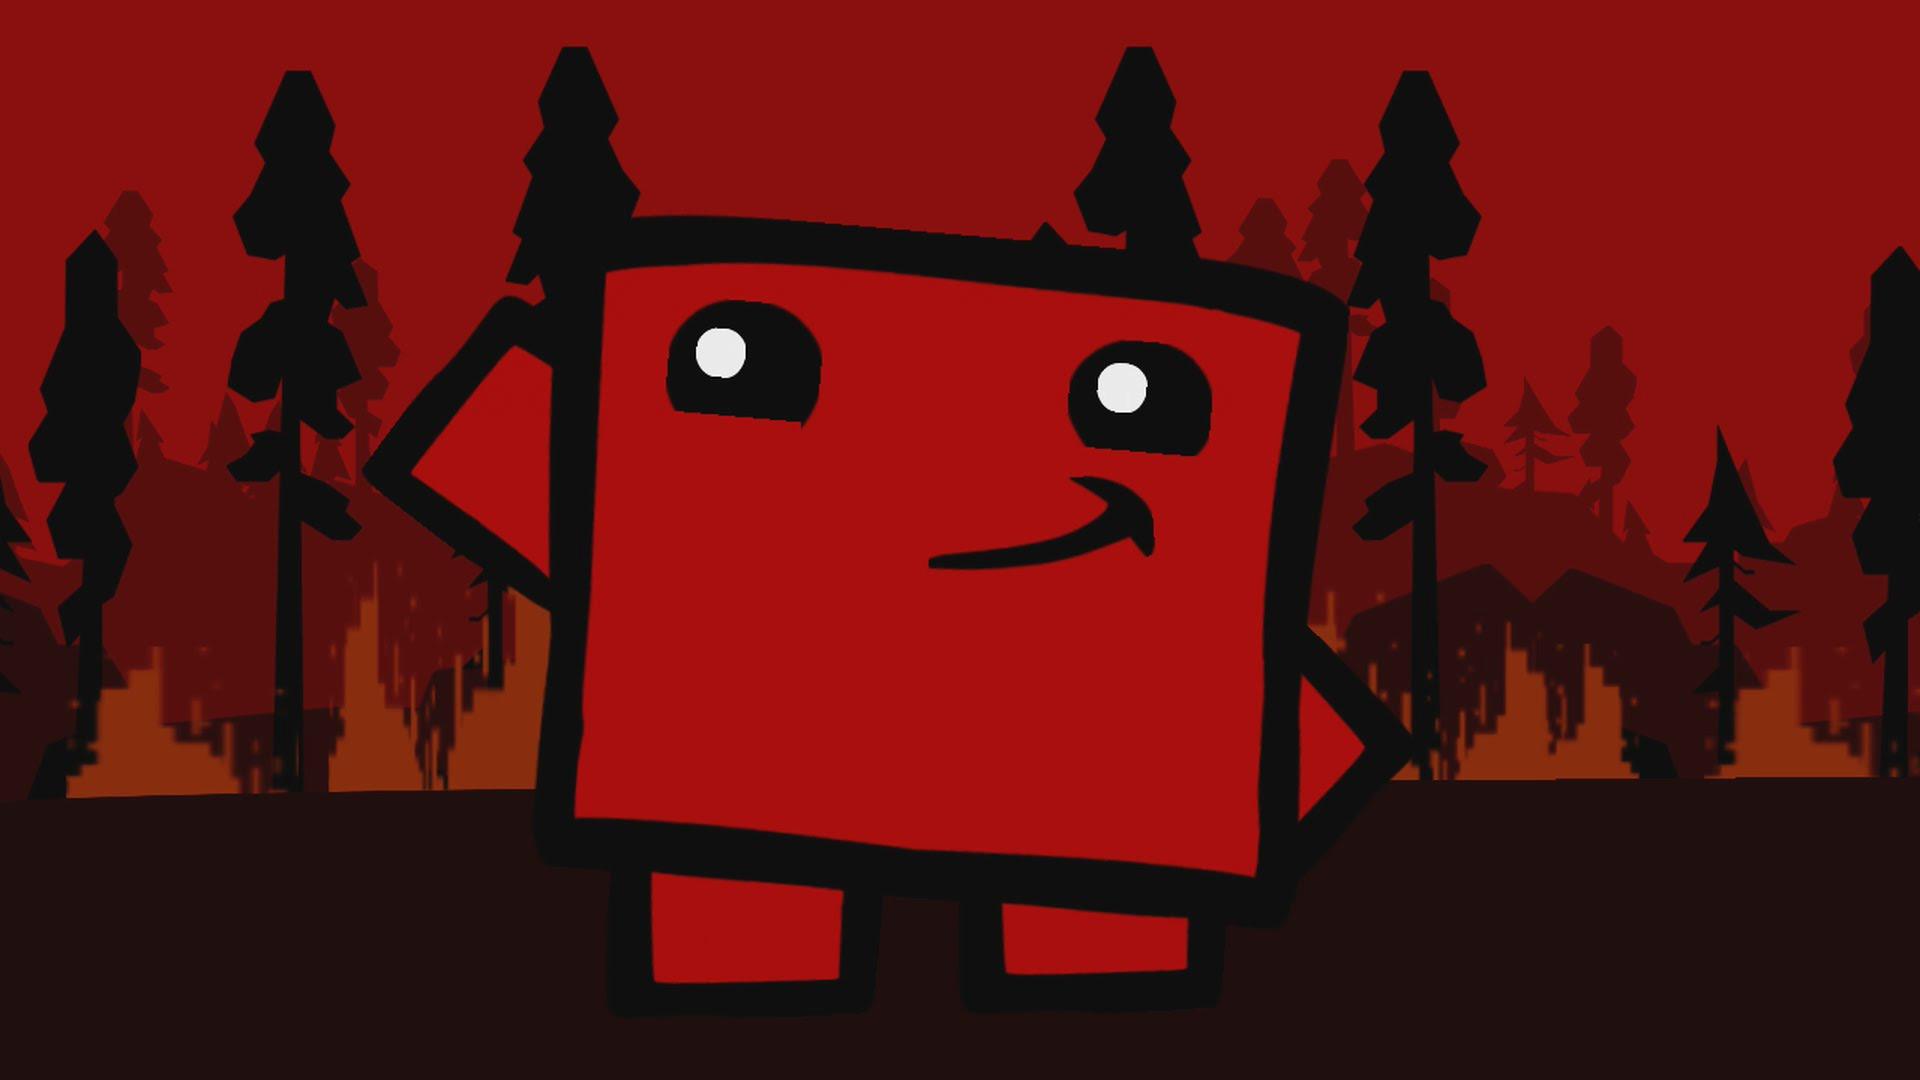 Super Meat Boy is brilliant on the Switch even without a traditional